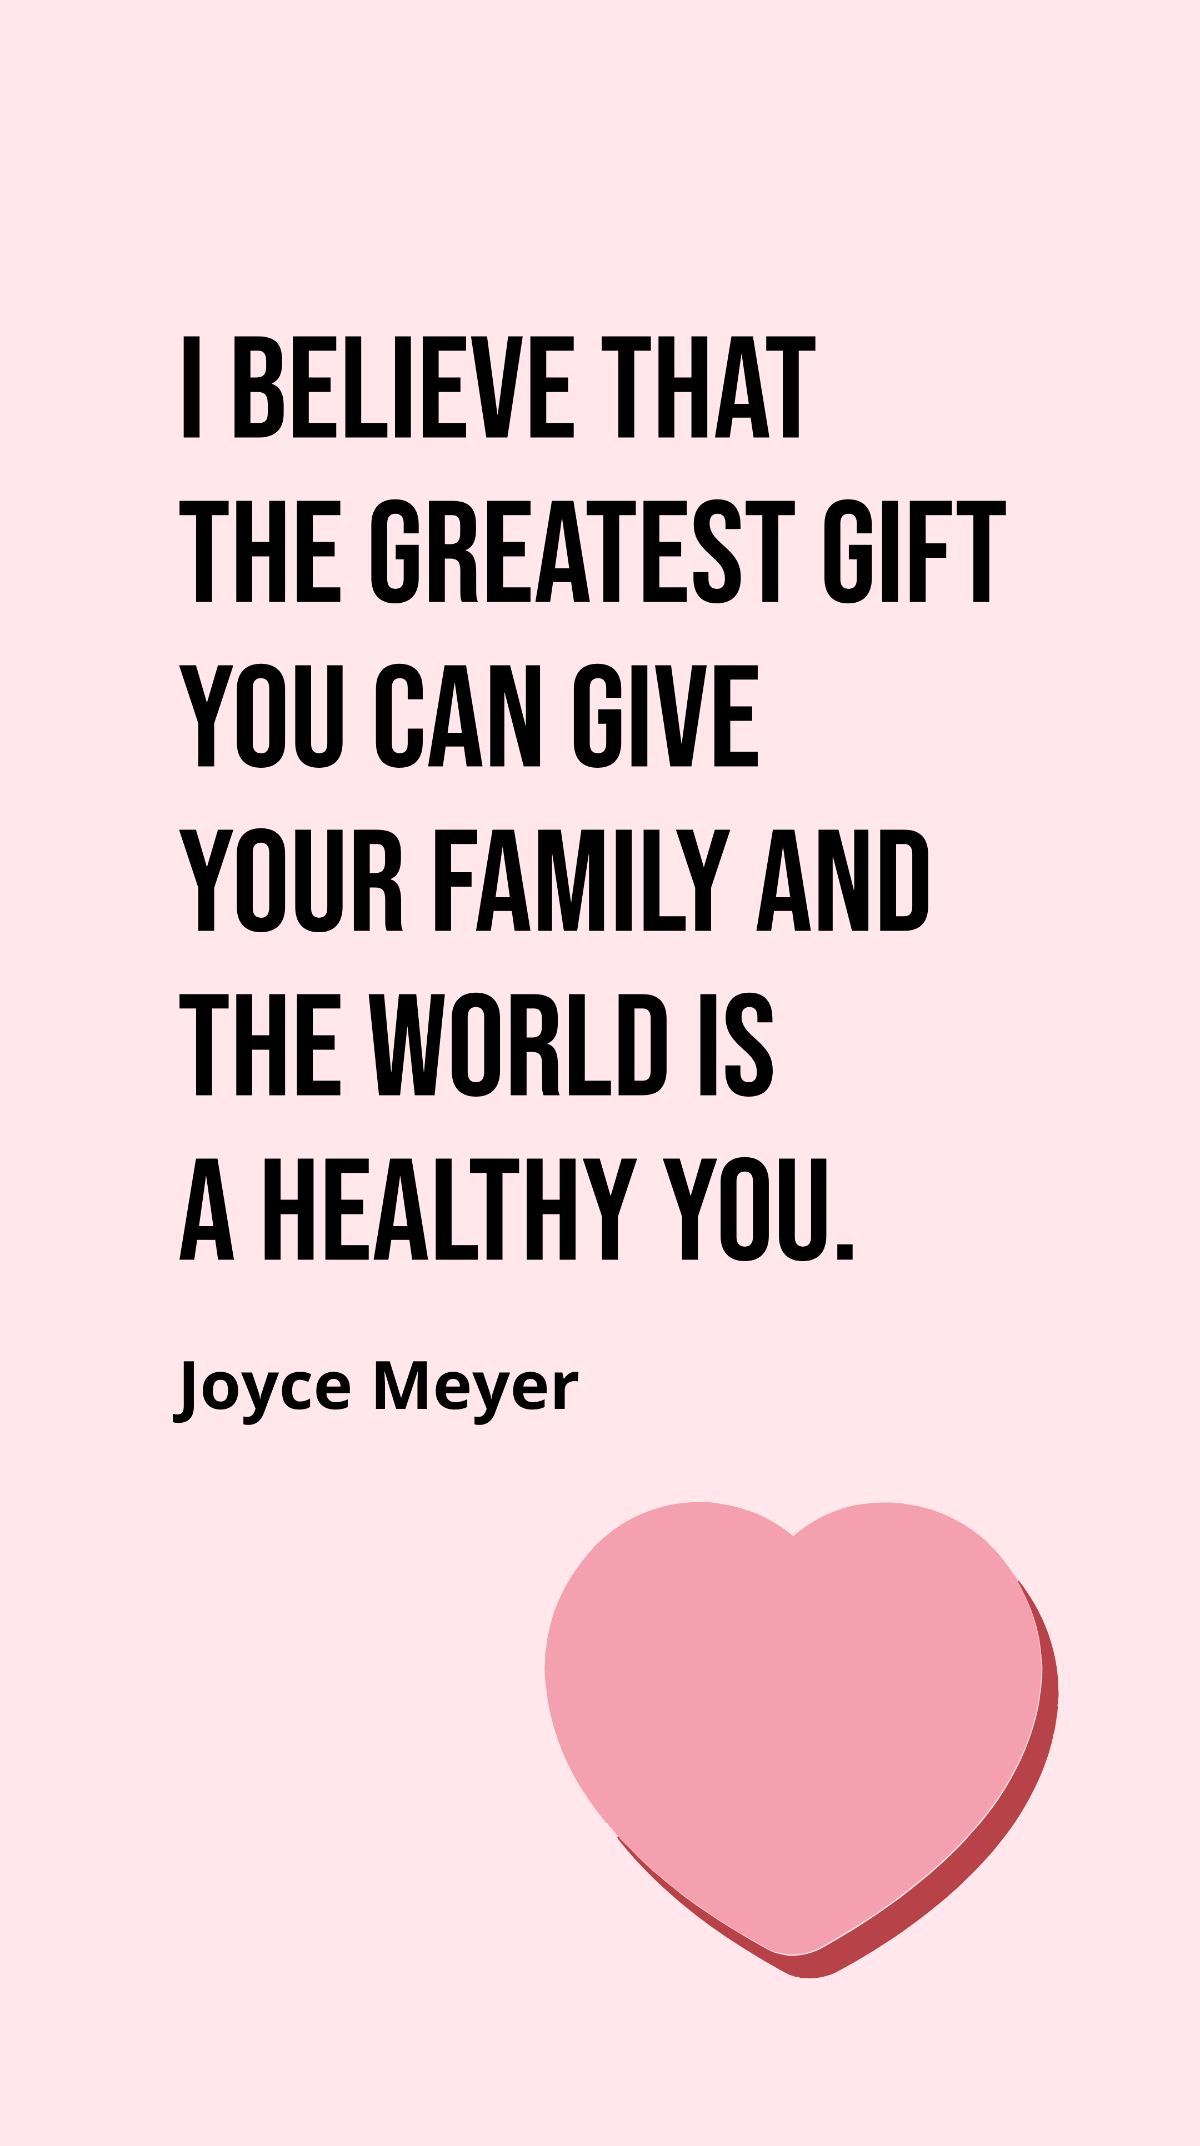 Joyce Meyer - I believe that the greatest gift you can give your family and the world is a healthy you. Template